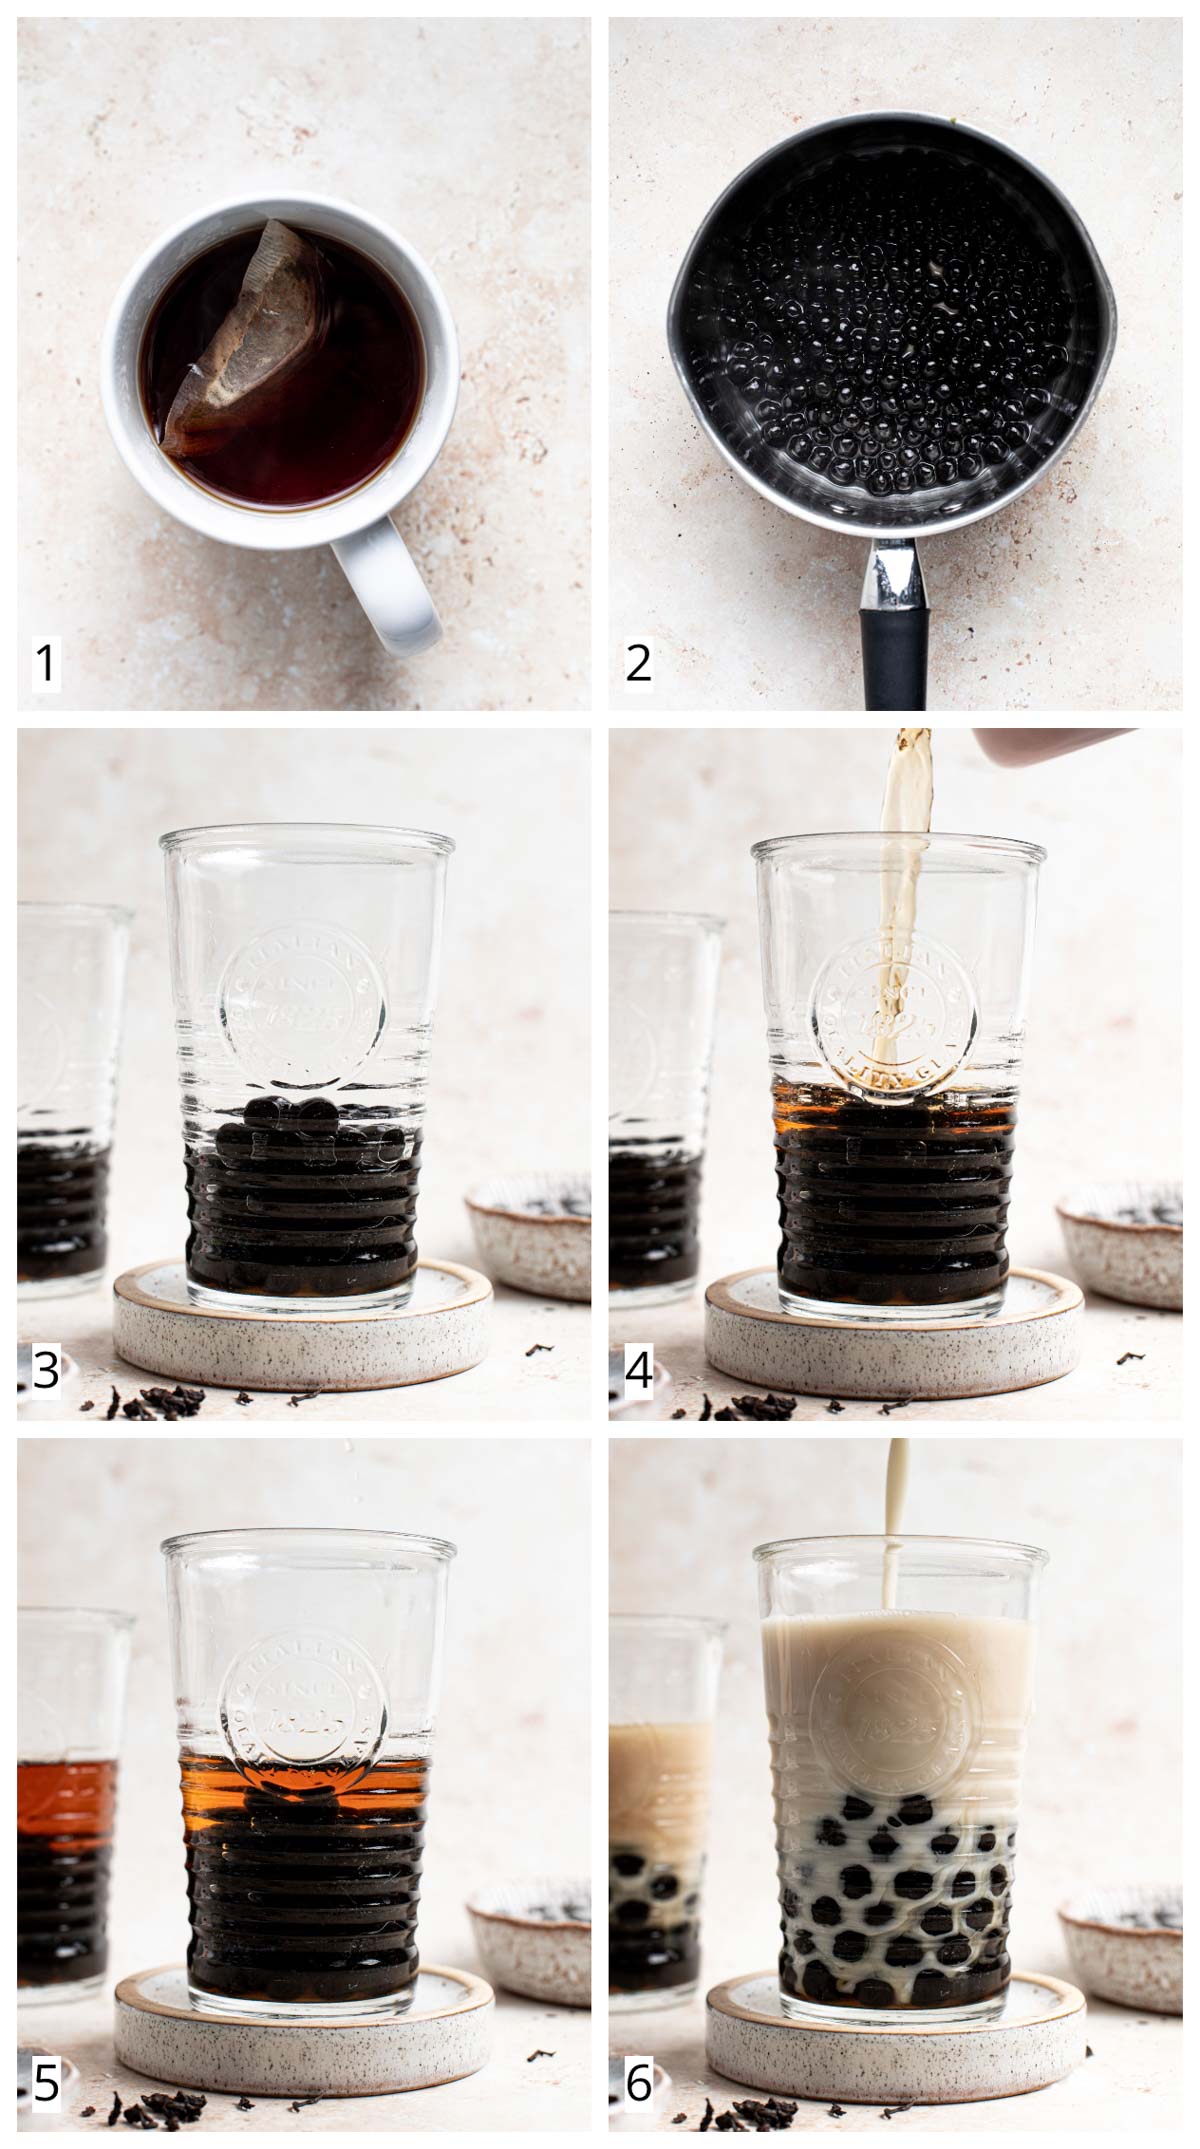 A collage of six images showing the six steps of making rose milk tea.